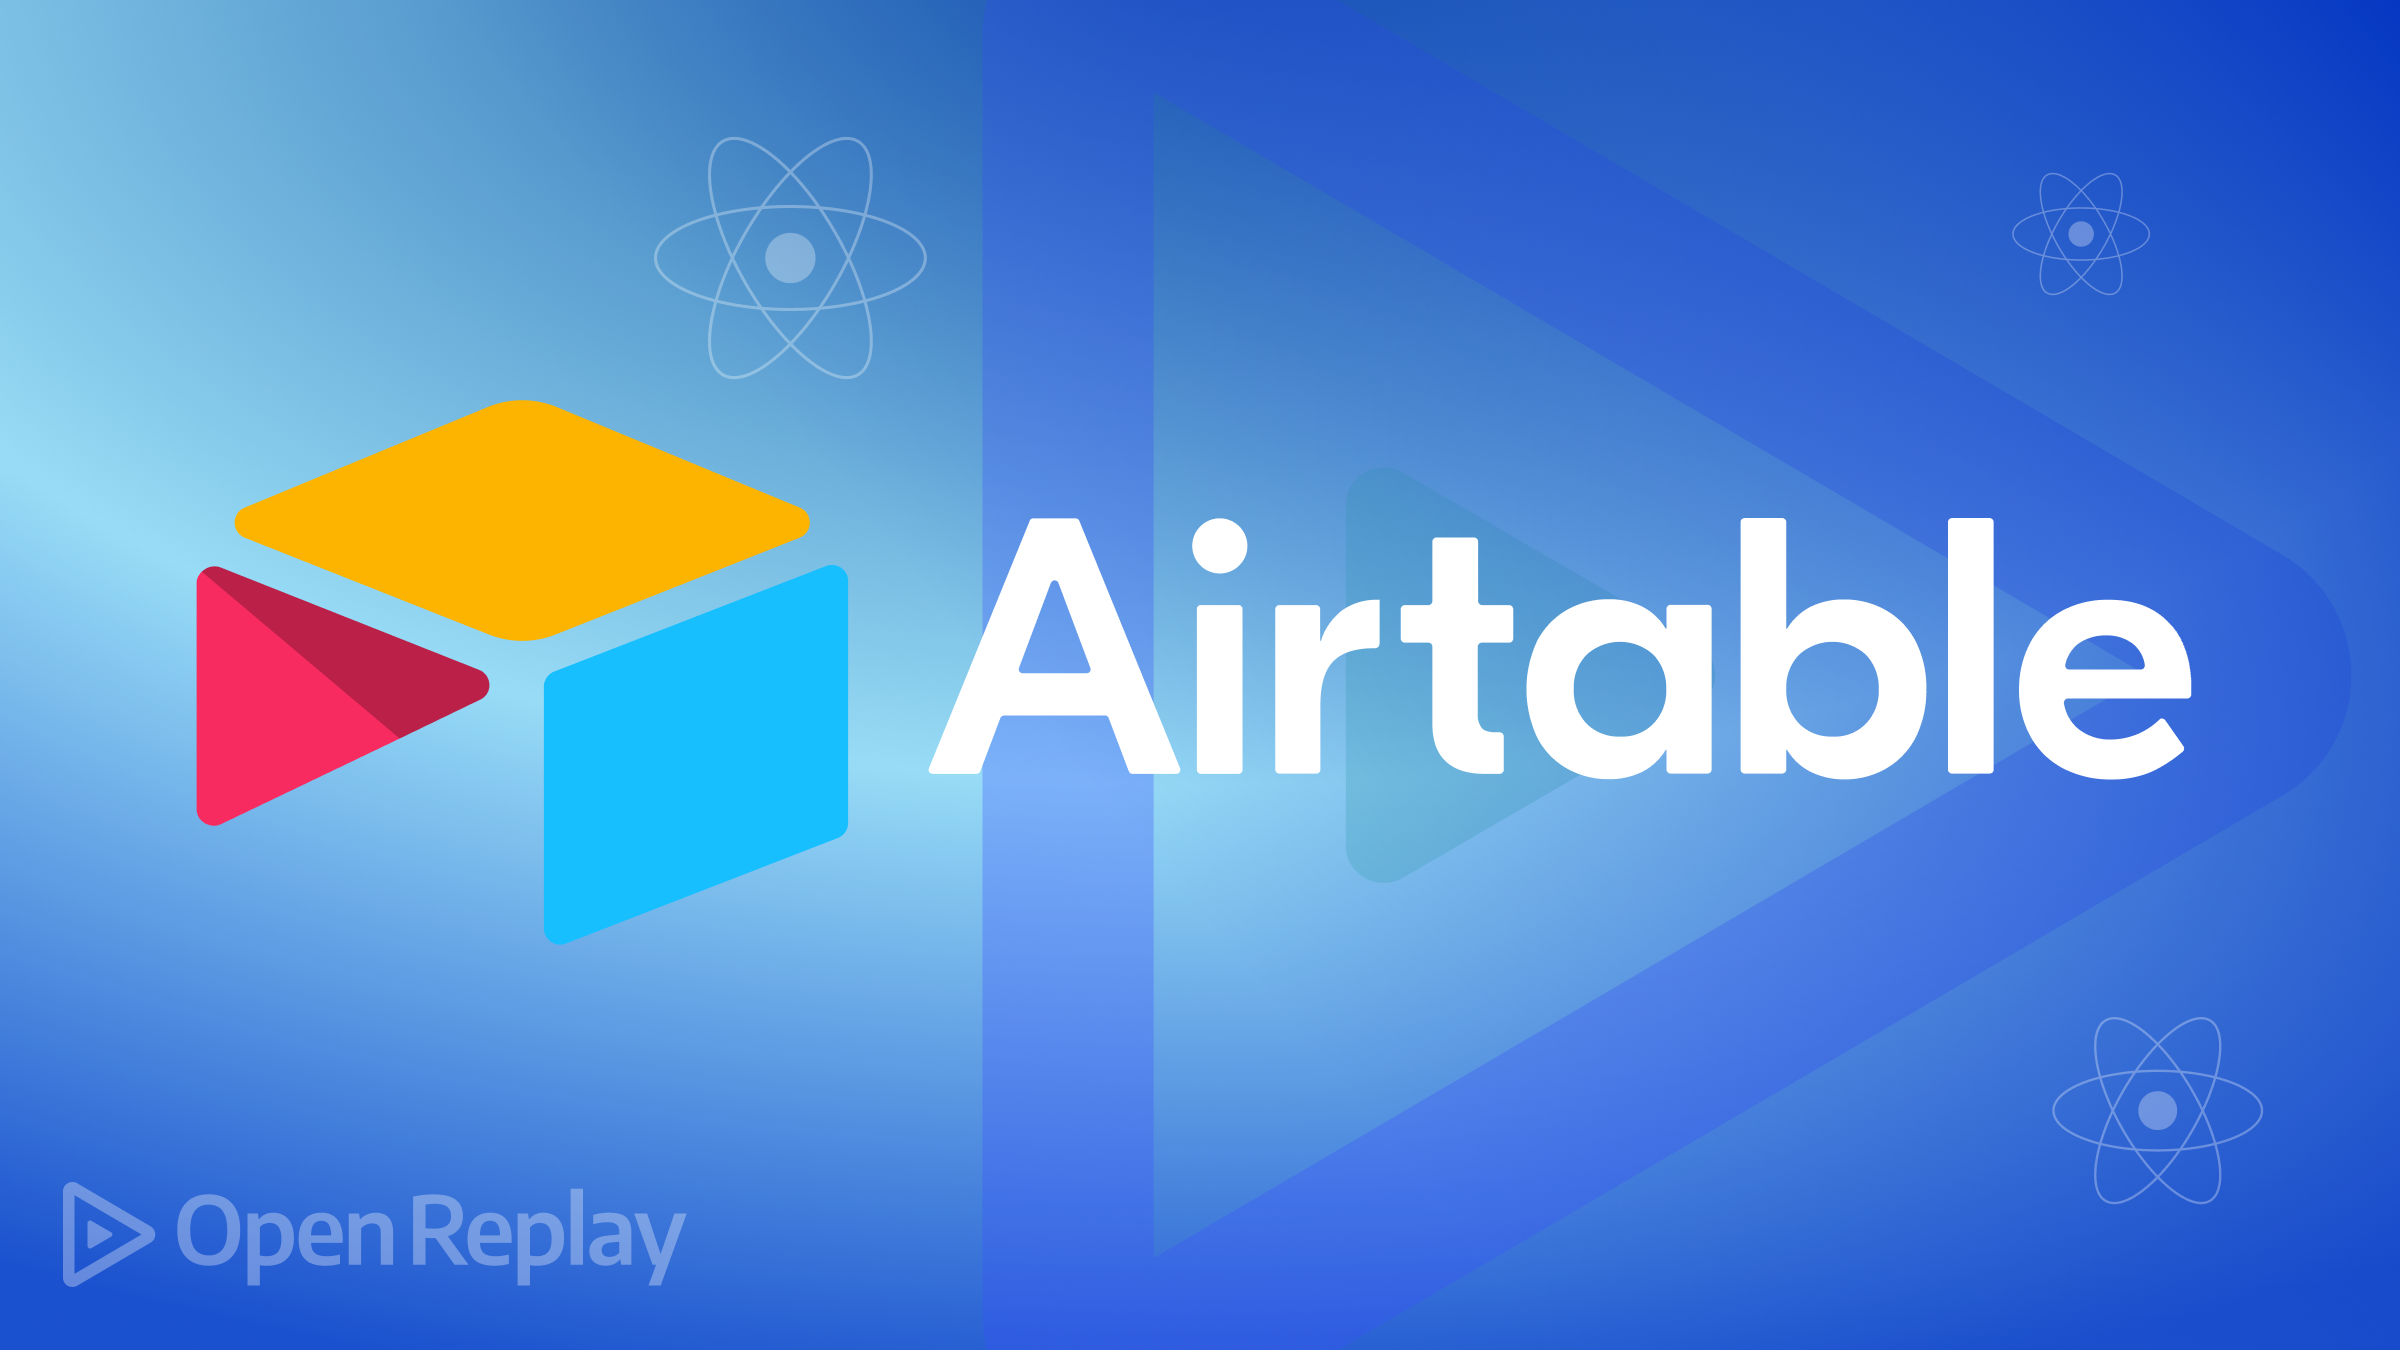 Airtable: a low-code solution for building modern apps